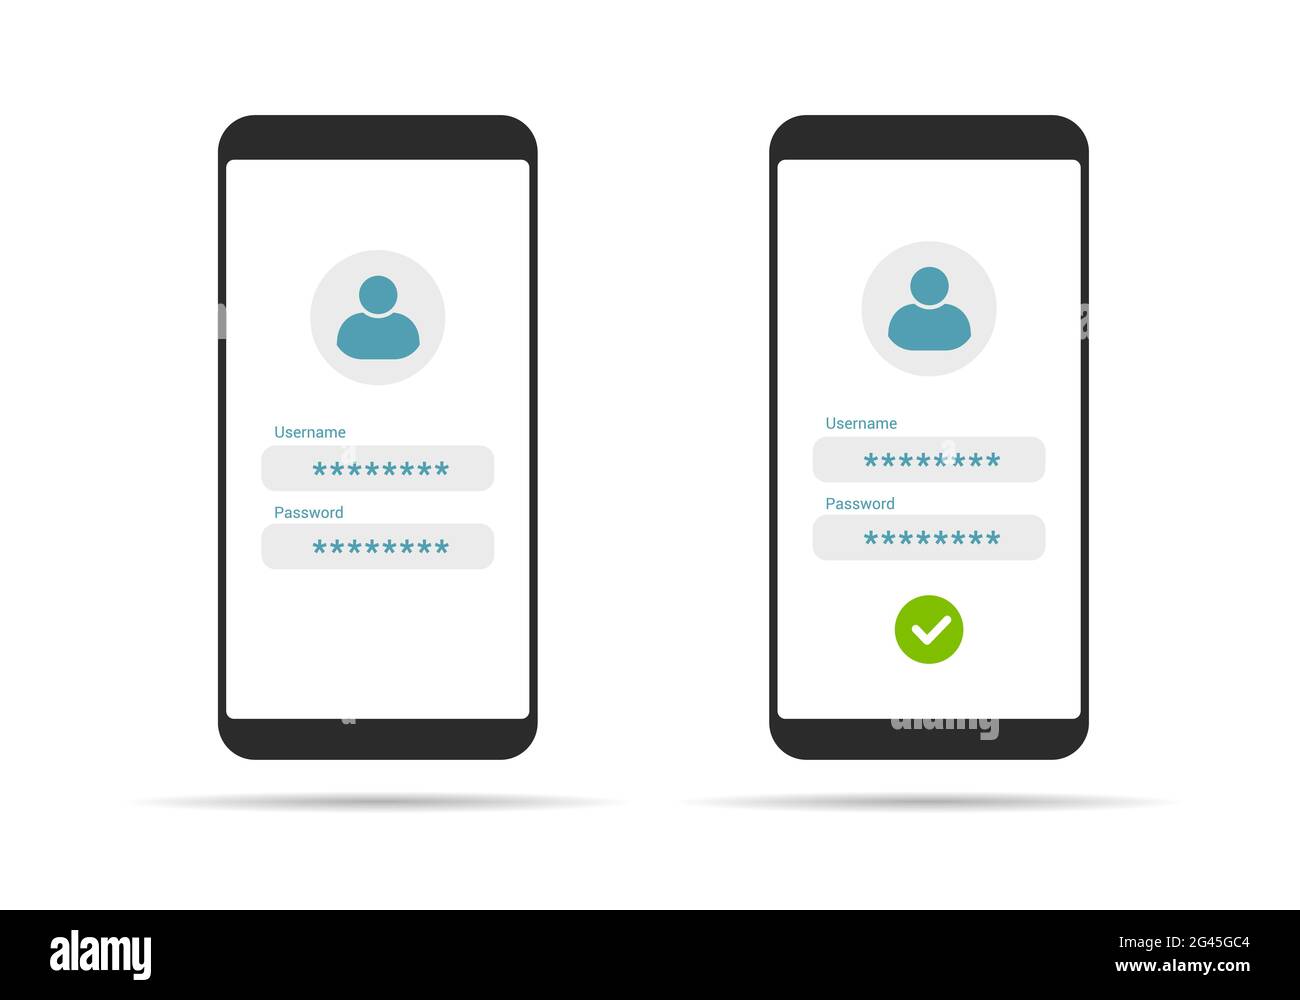 Flat design illustration of touch screen smartphone. Login form for entering username and password - vector Stock Vector